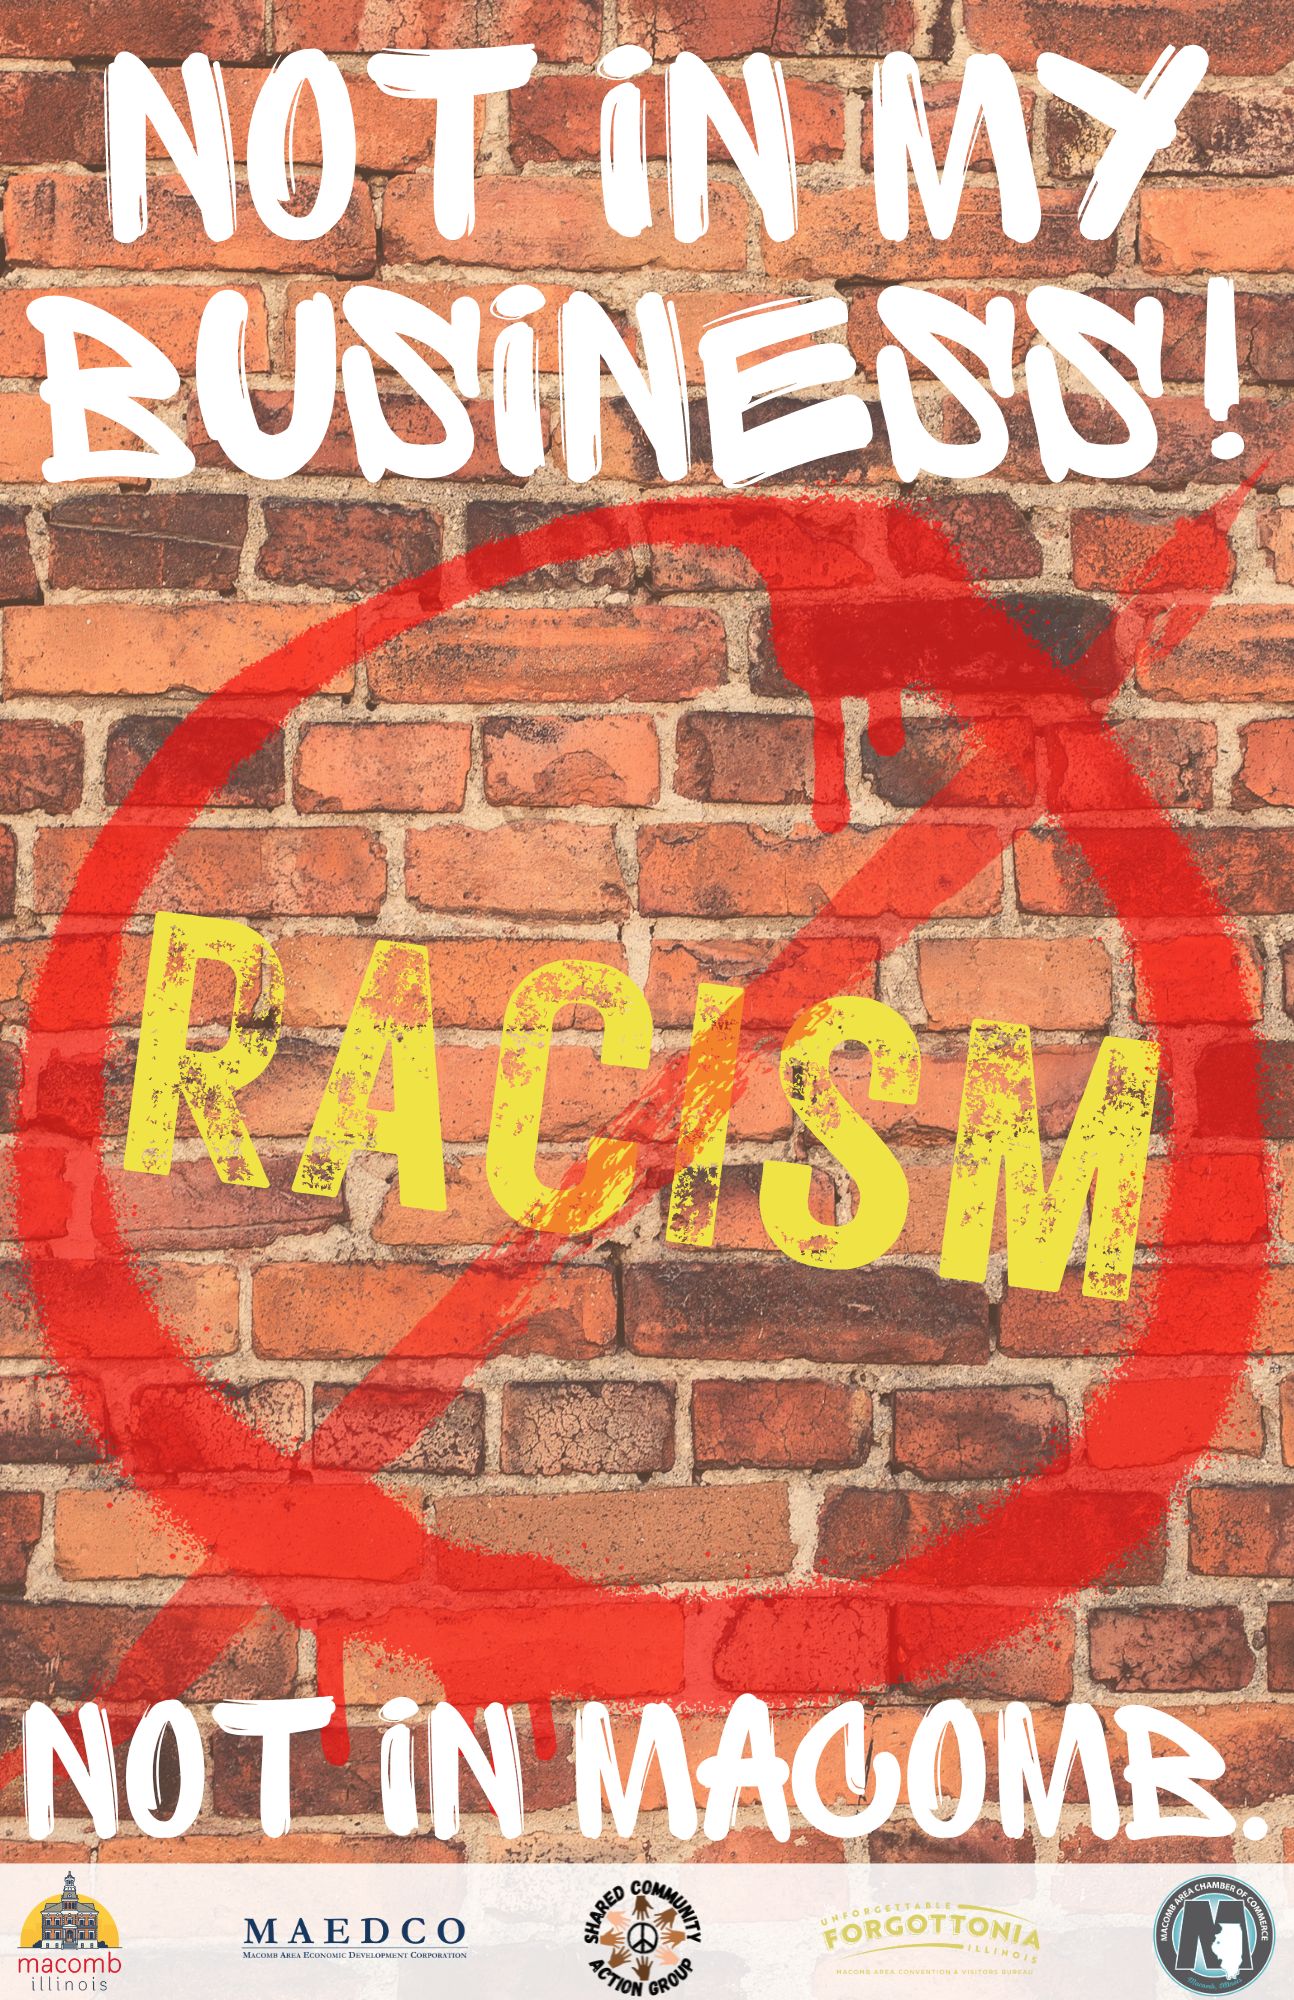 Chamber Statement on Racism